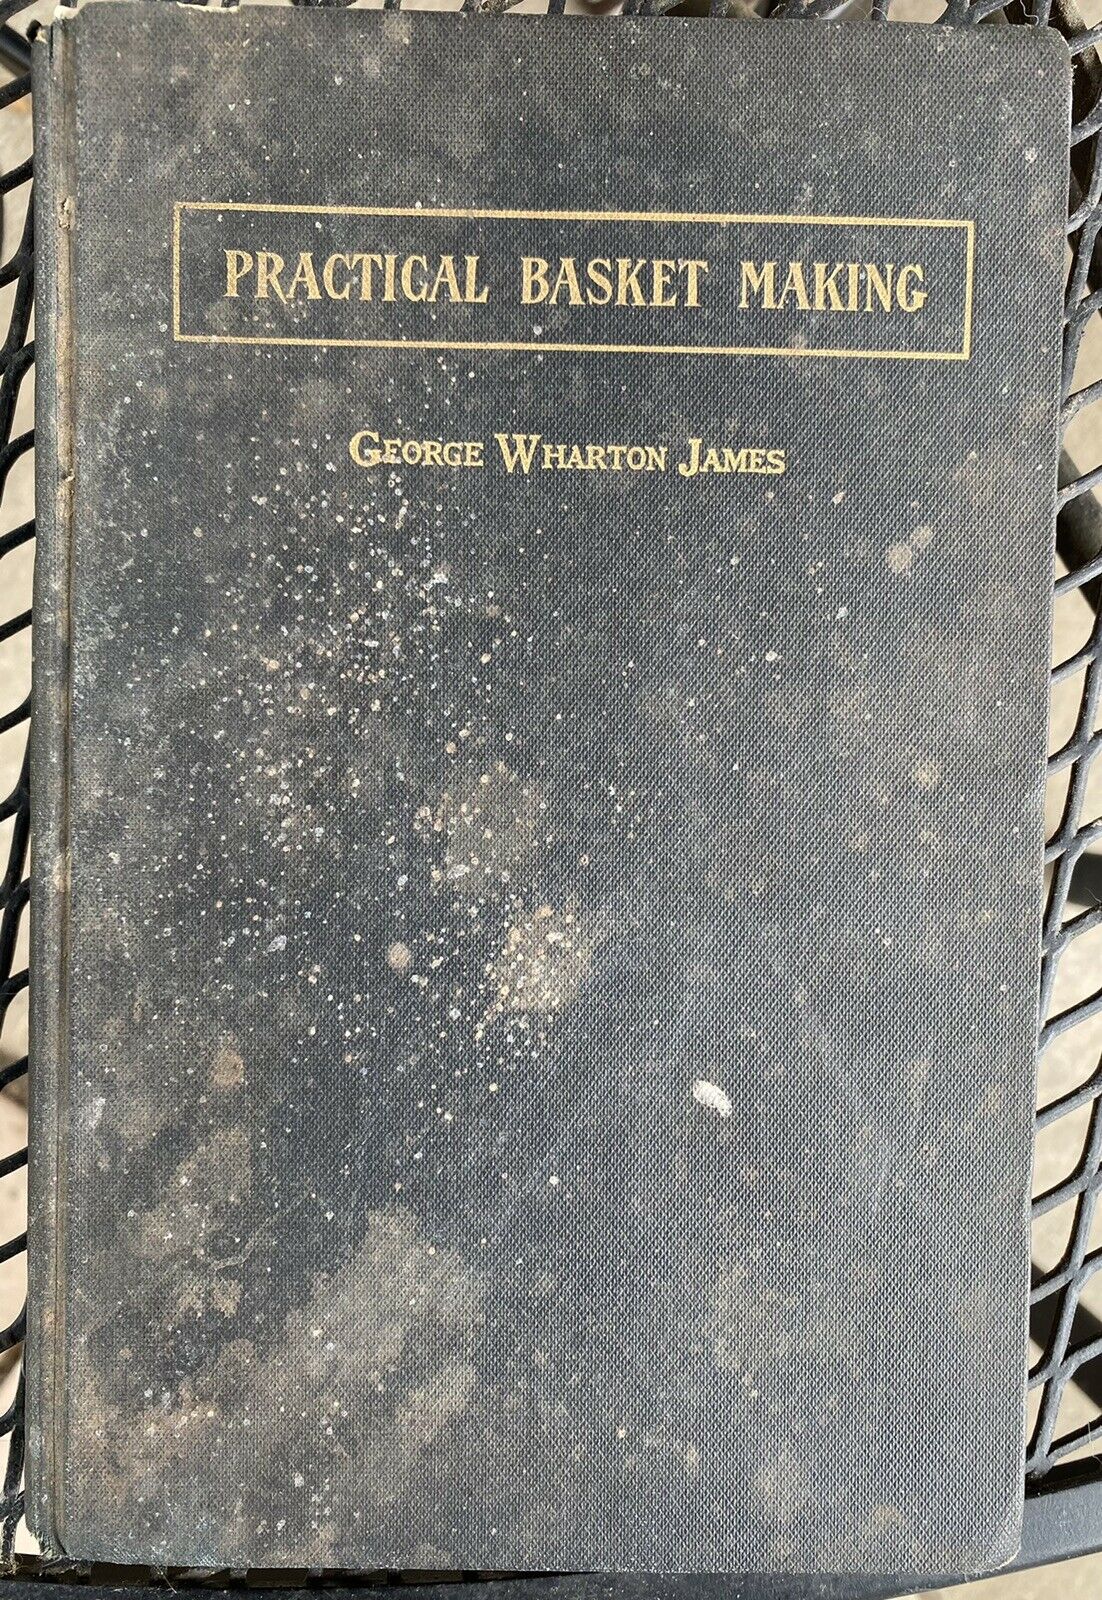 Practical Basket Making Wharton James Illustrated Hand-book Of Indian Basketry